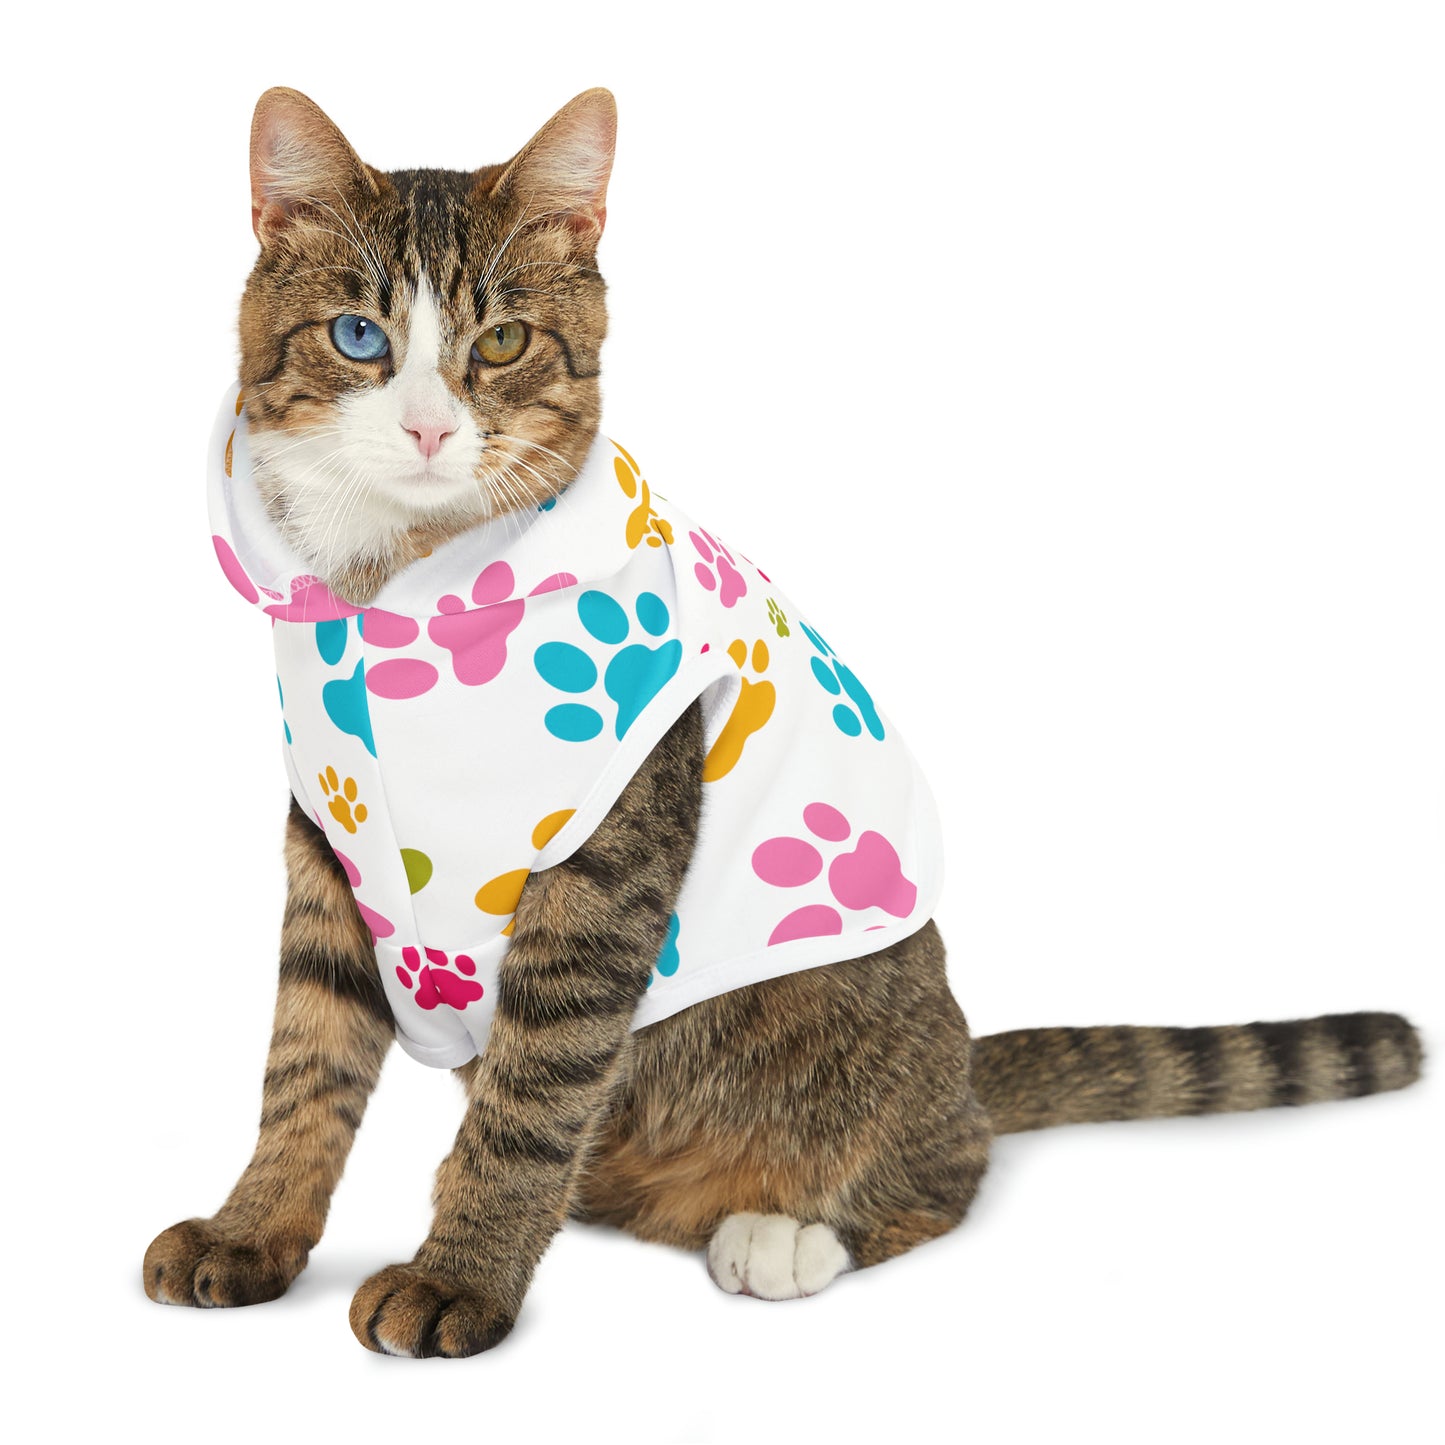 Colorful Paw Prints Pet Hoodie, Available in 5 Different Sizes, Choose Black or White Rib Color